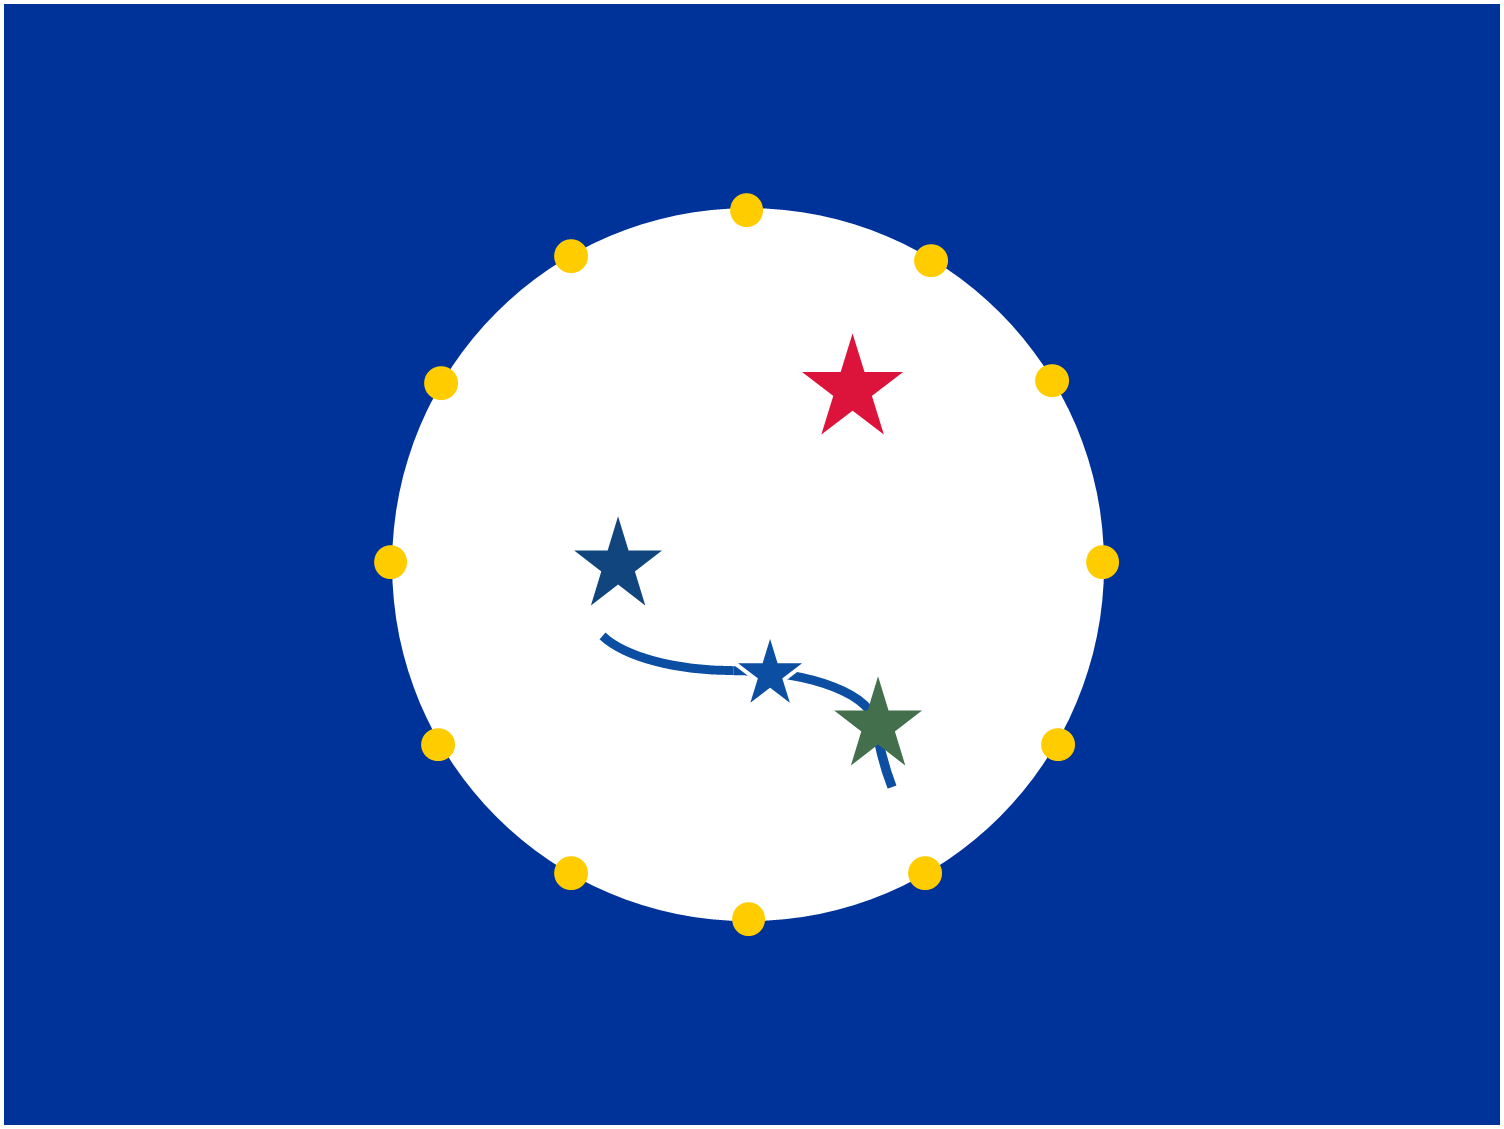 blue flag with white circle and four stars representing the four visegrad states